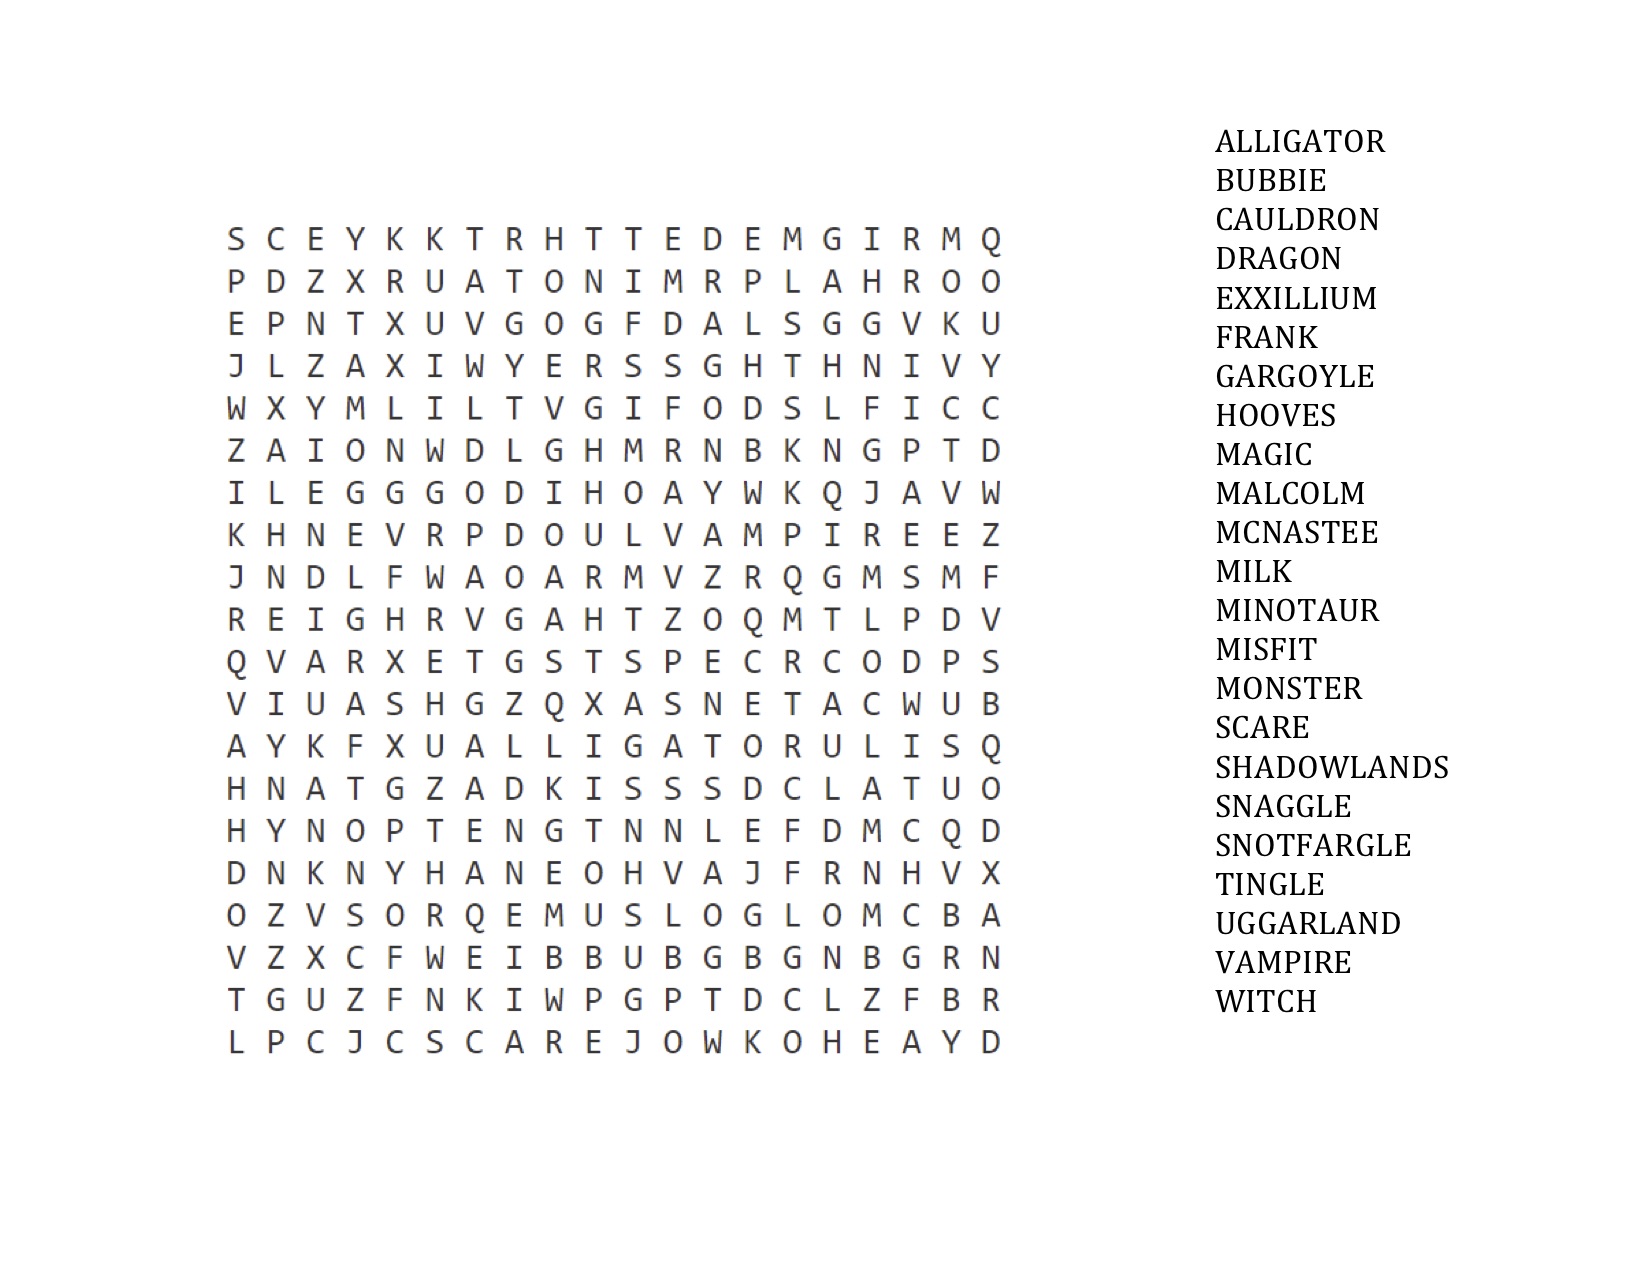 INTO THE SHADOWLANDS: Word Search